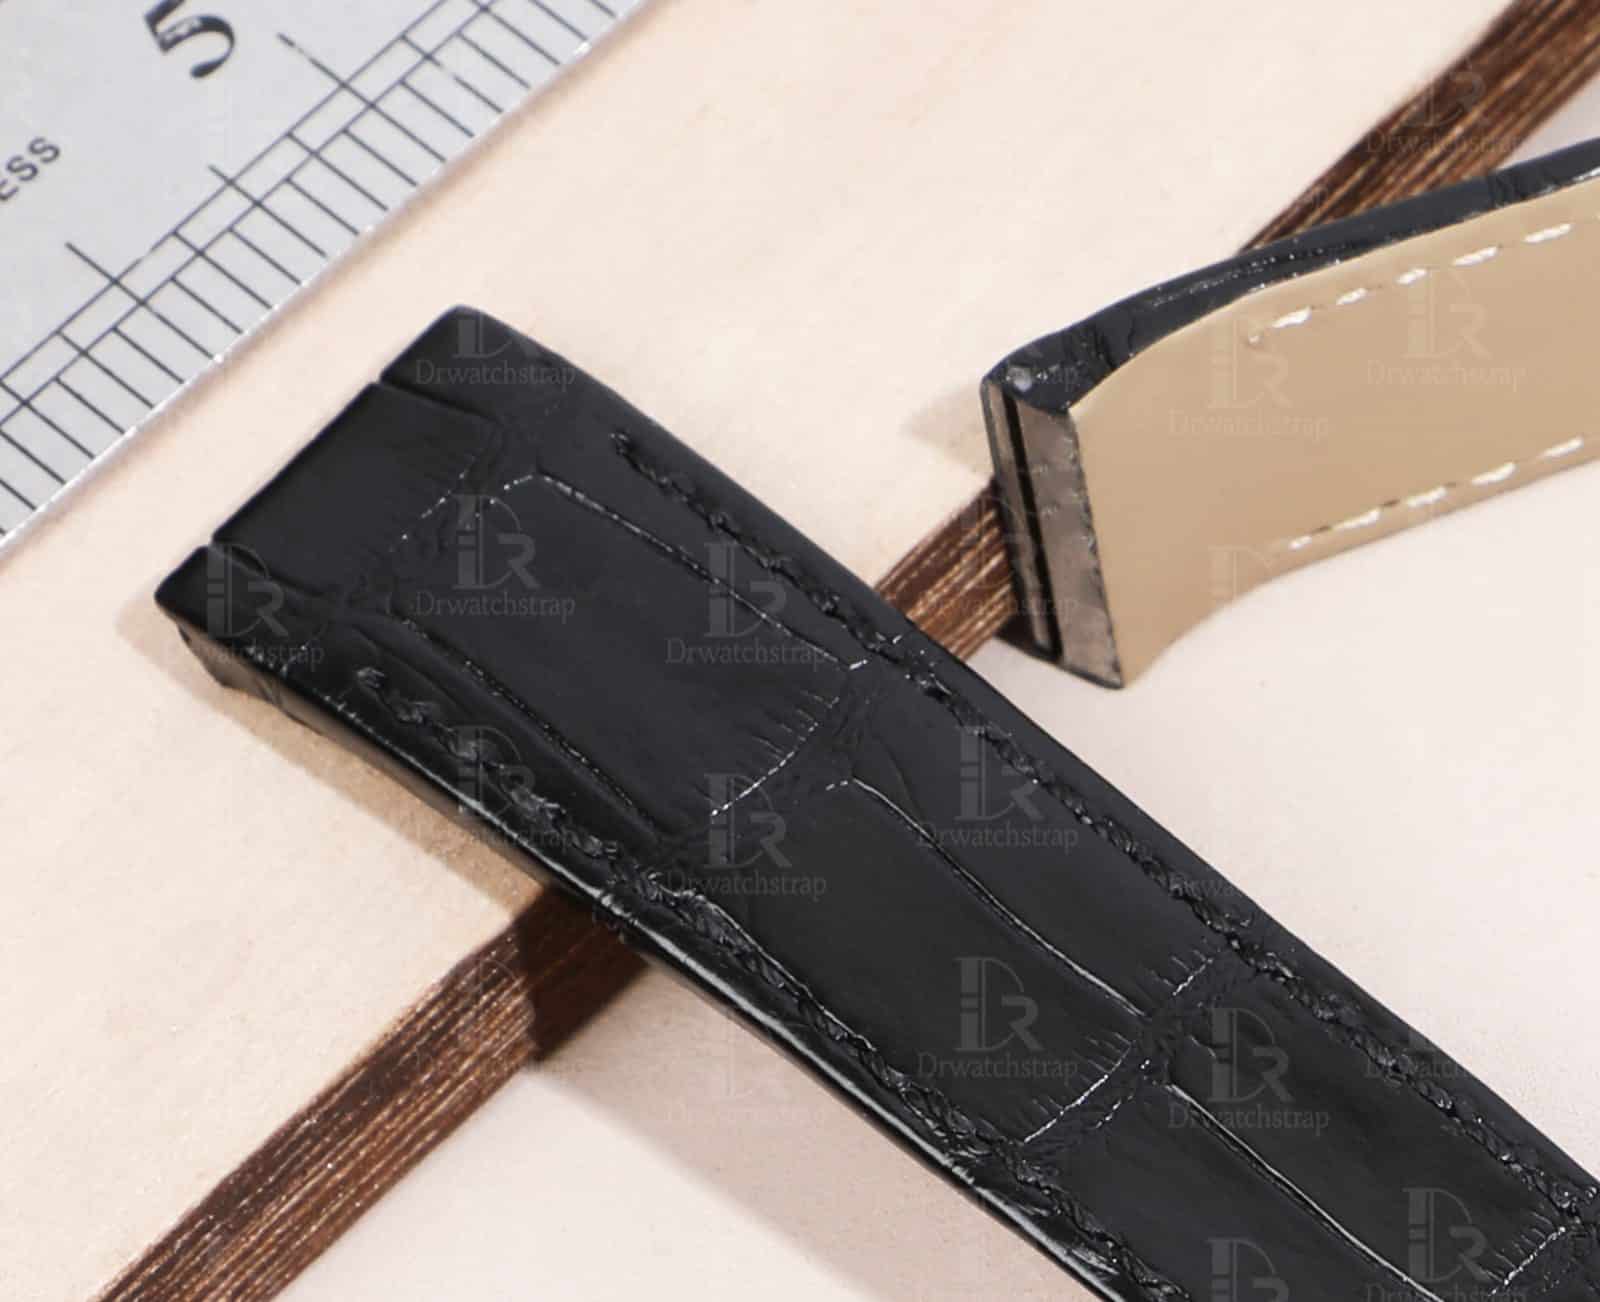 Genuine best quality OEM custom American Alligator black leather watch Cartier santos strap and watch band replacement for Cartier de Santos old style watches - Shop the high-end quality crocodile replacement leather straps and watch bands online at a low price